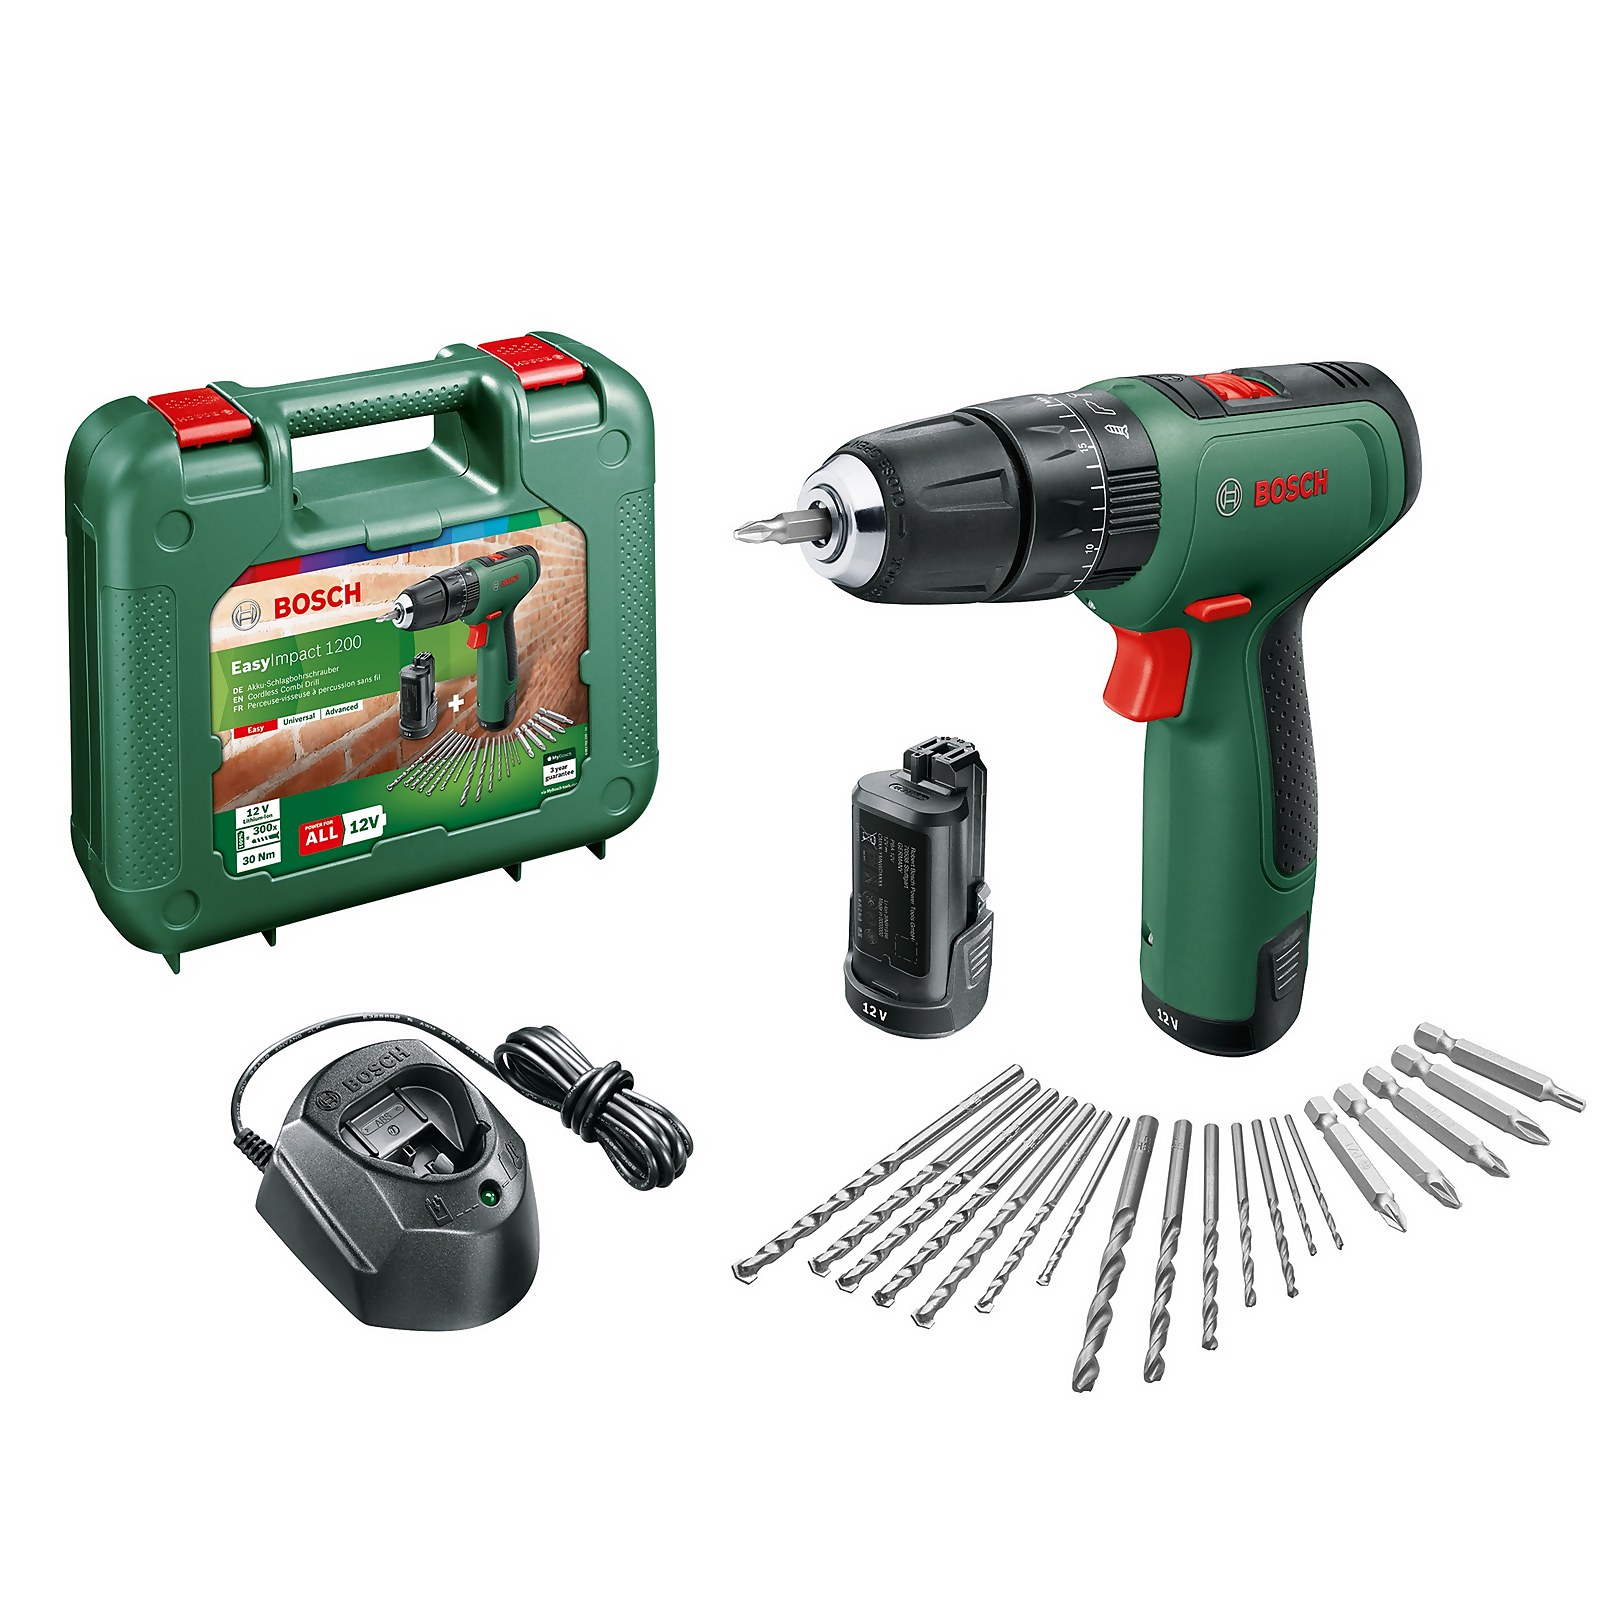 Photo of Bosch Easyimpact 1200 Combi Drill With 2x 1.5ah Batteries & Charger